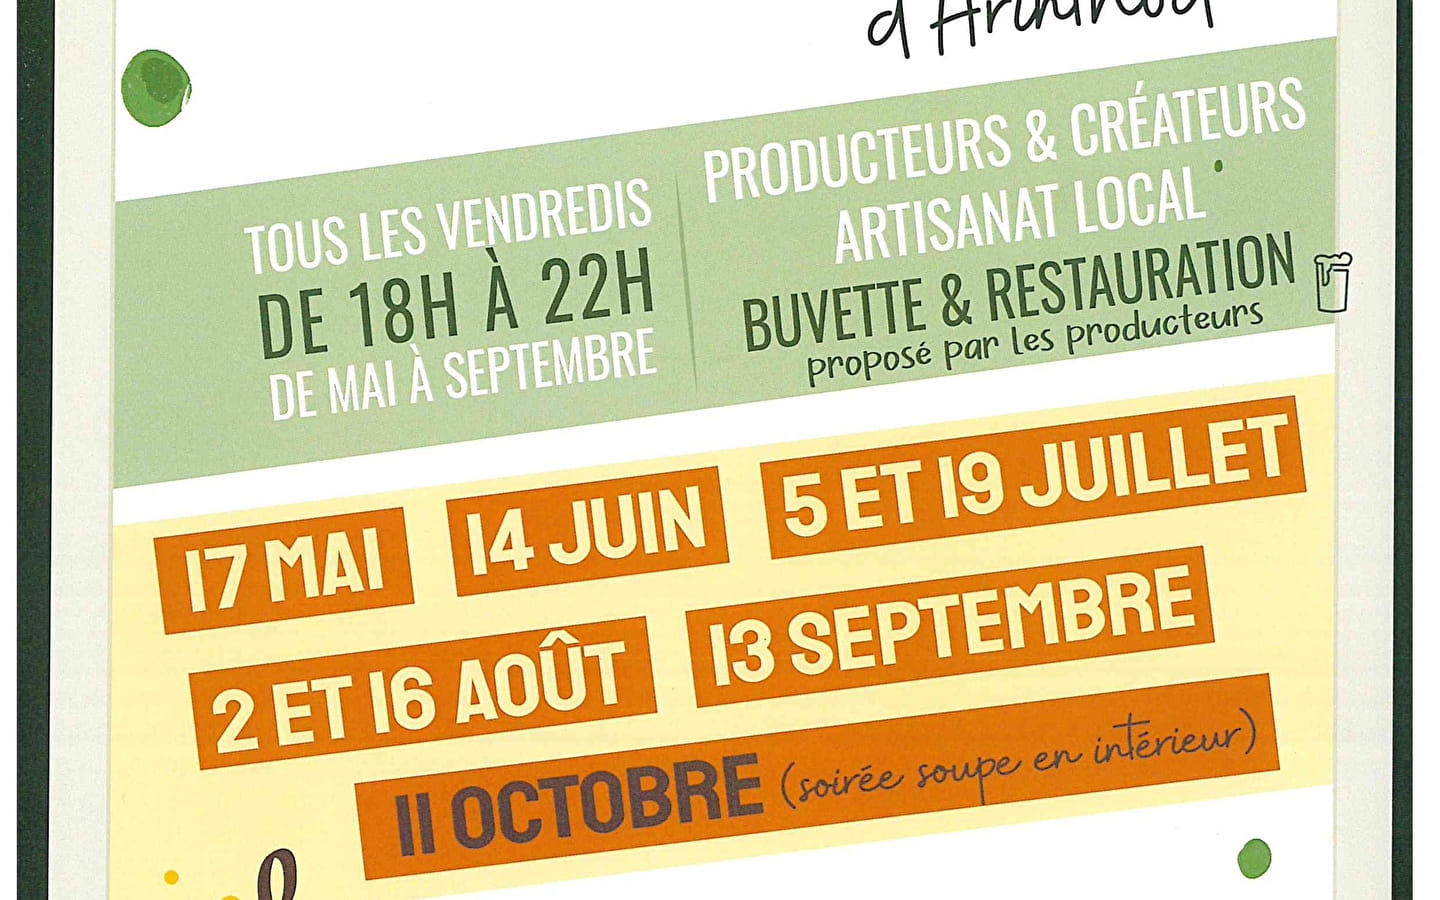 Les p'tits marchés: local producers and a musical atmosphere 